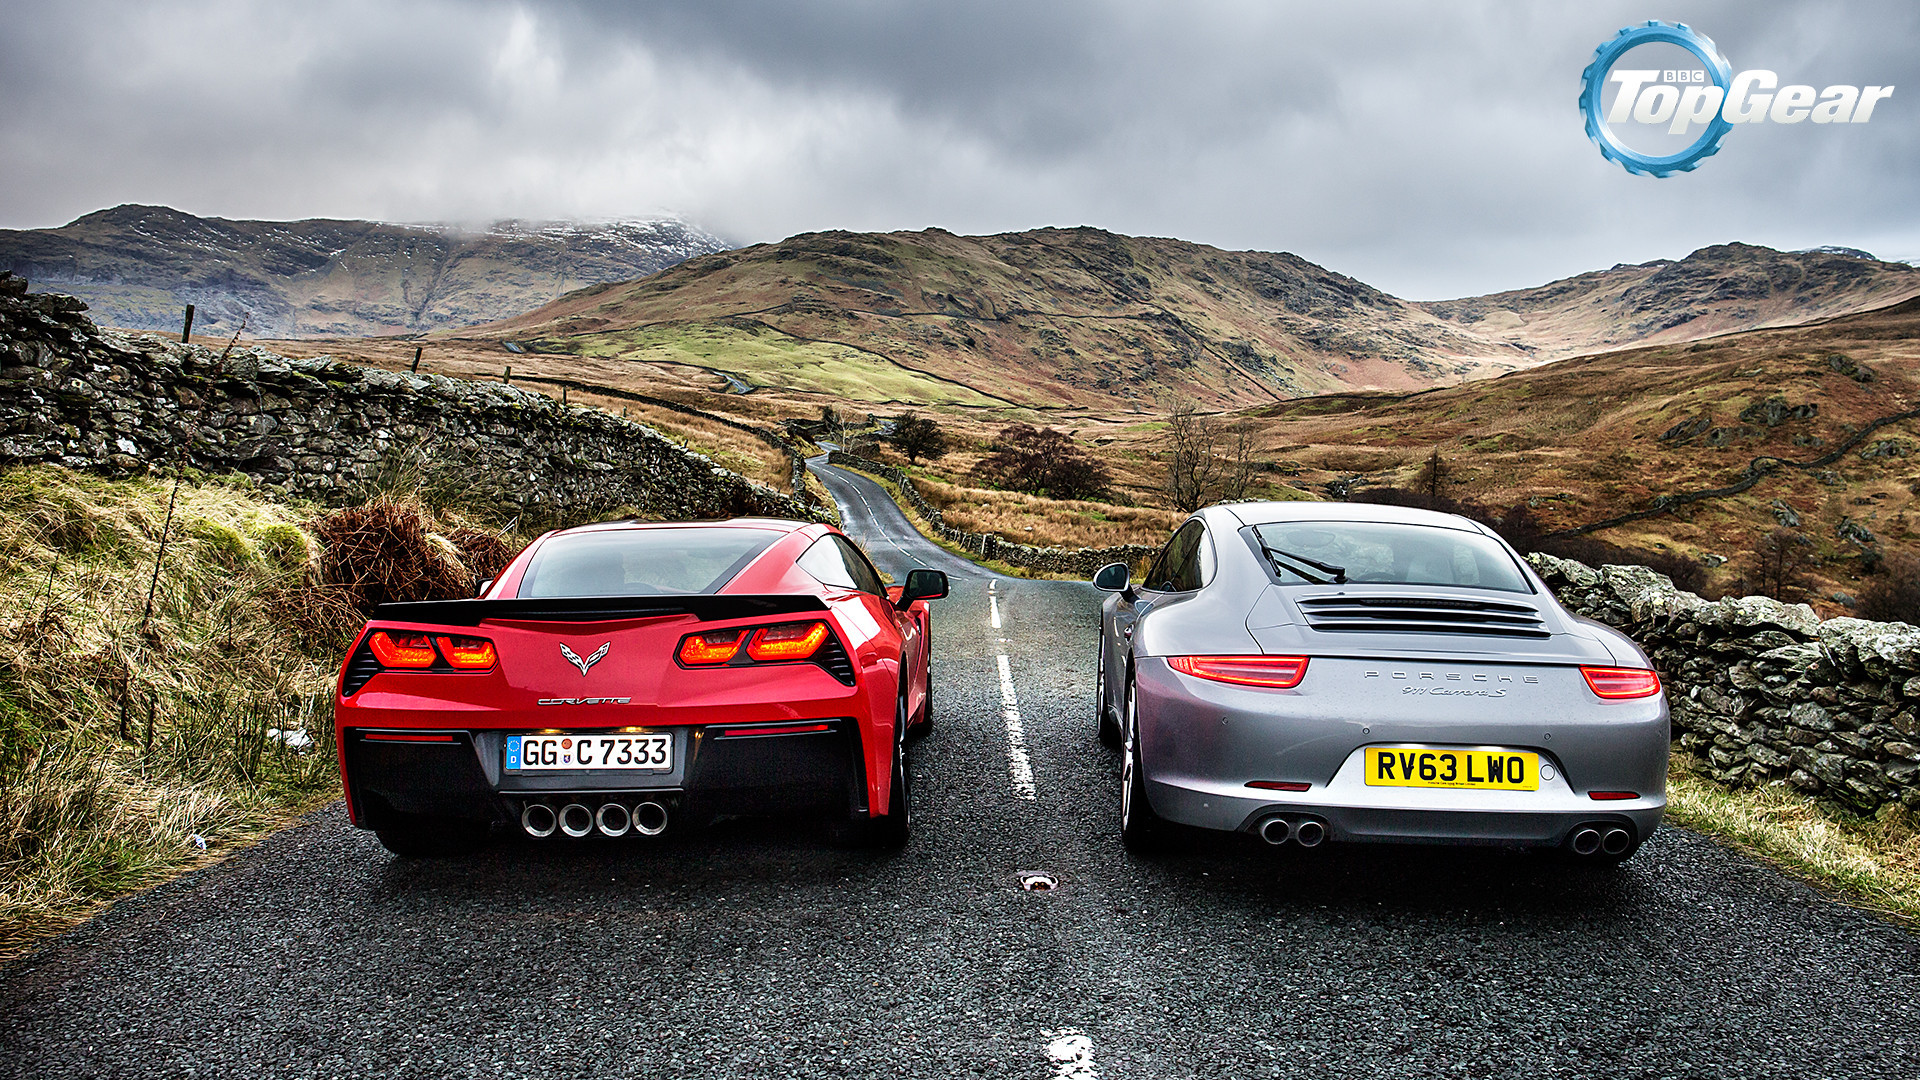 1920x1080 Top Gear Wallpaper of the C7 Corvette and the 991 Carerra S